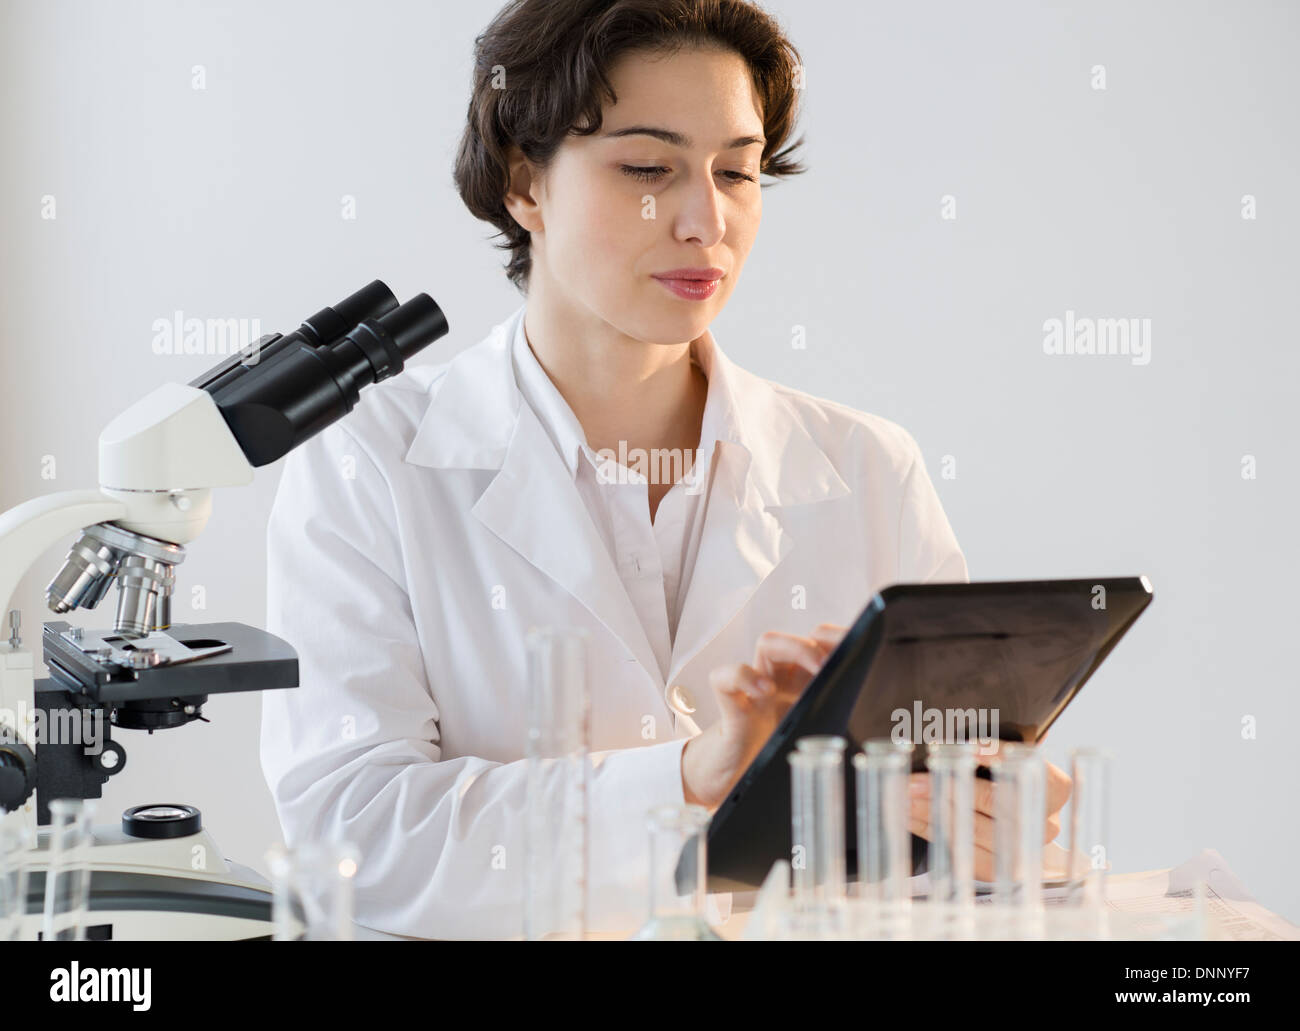 Scientist working in laboratory Banque D'Images